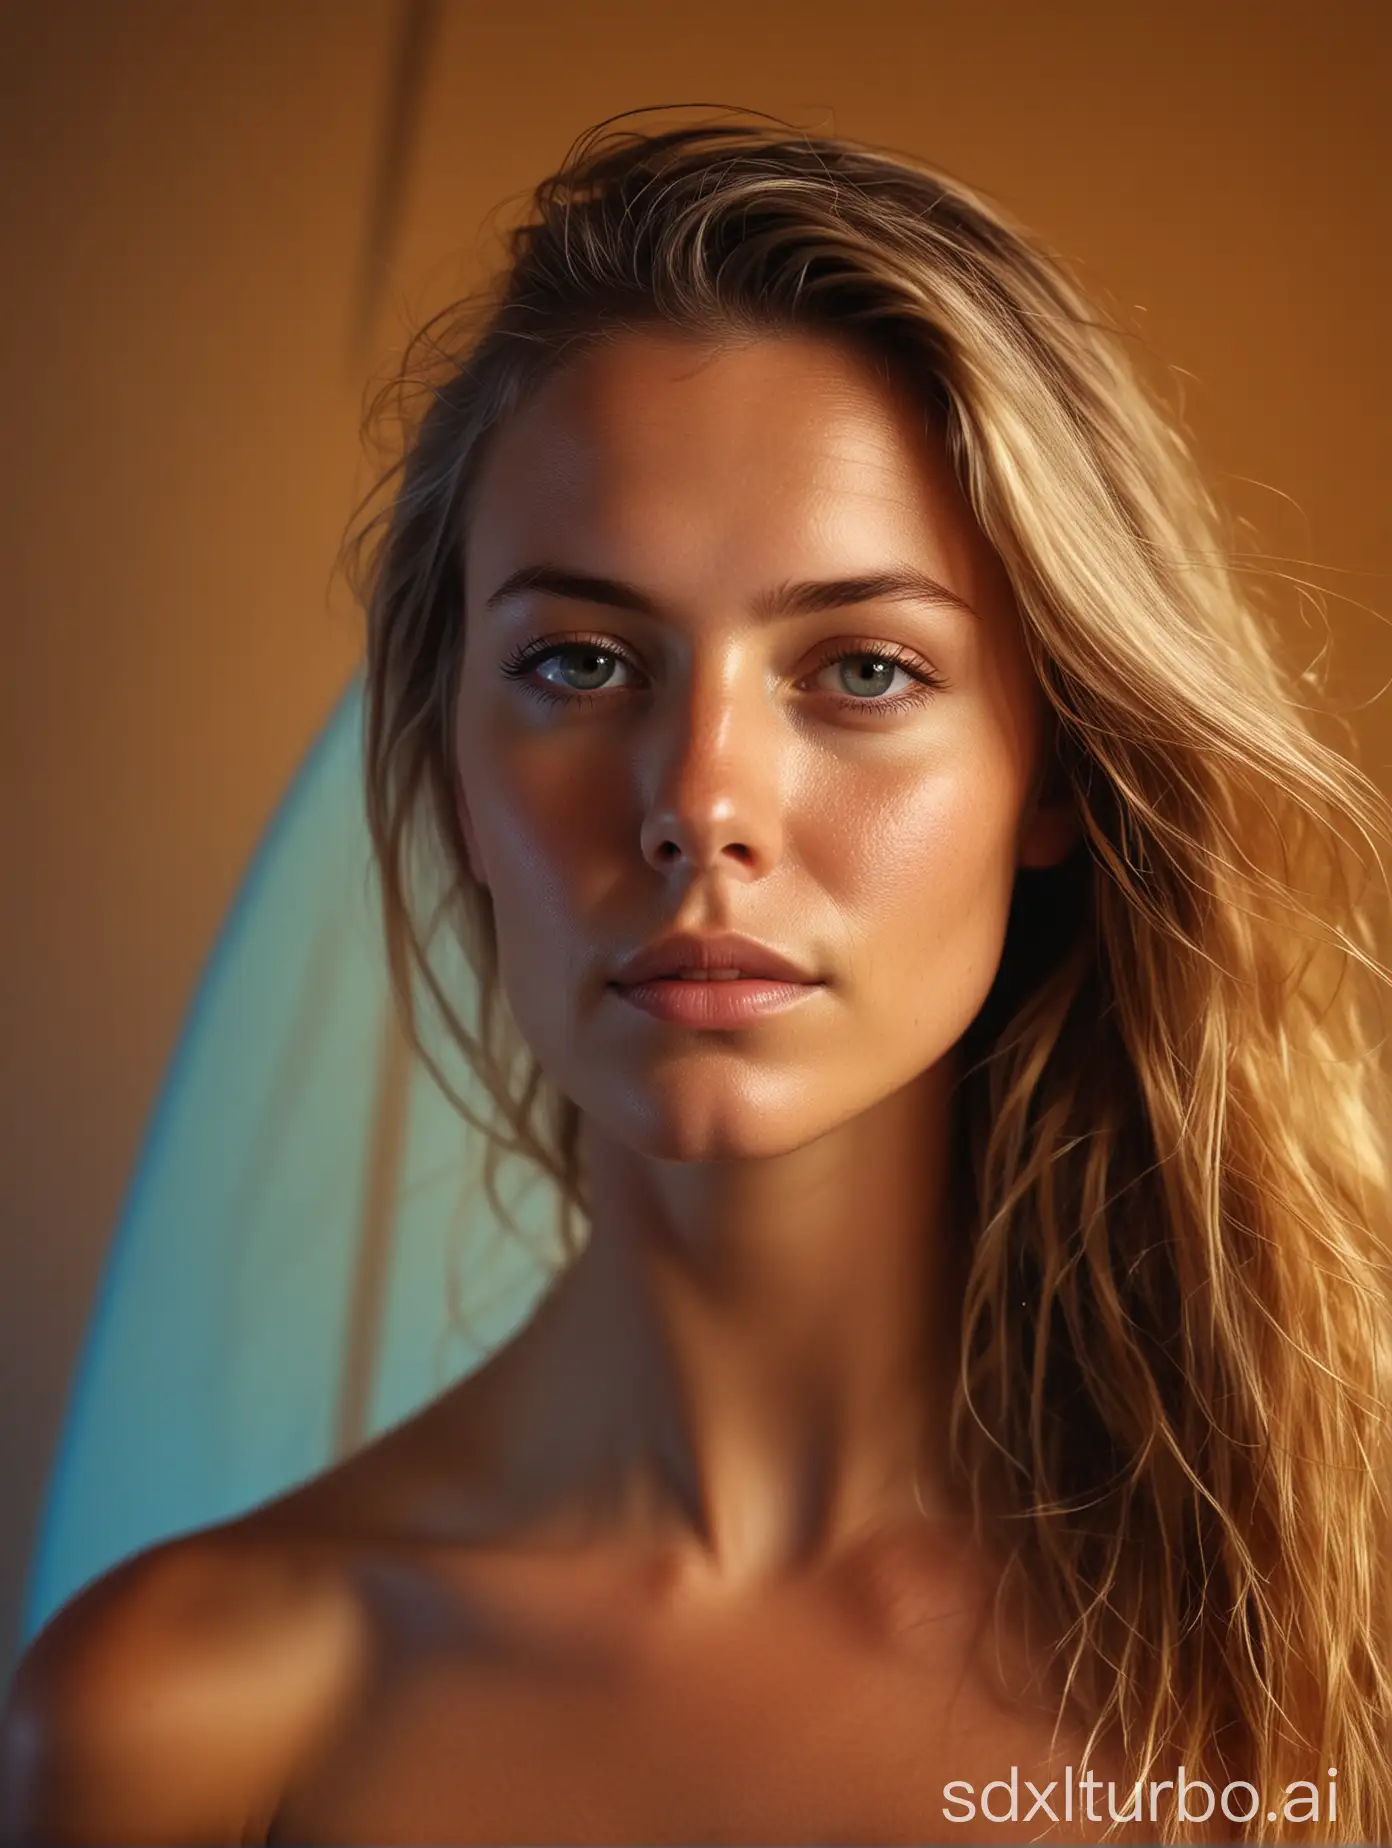 A portrait of the Surfer in front of light background, illuminated by blue light from above, creating an atmospheric and mysterious mood. Contrasts against the light orange background behind her. Her expression appears contemplative or pensive as she gazes into the dimly lit space. Shot at eye level, capturing a moment that evokes emotion and mystery -